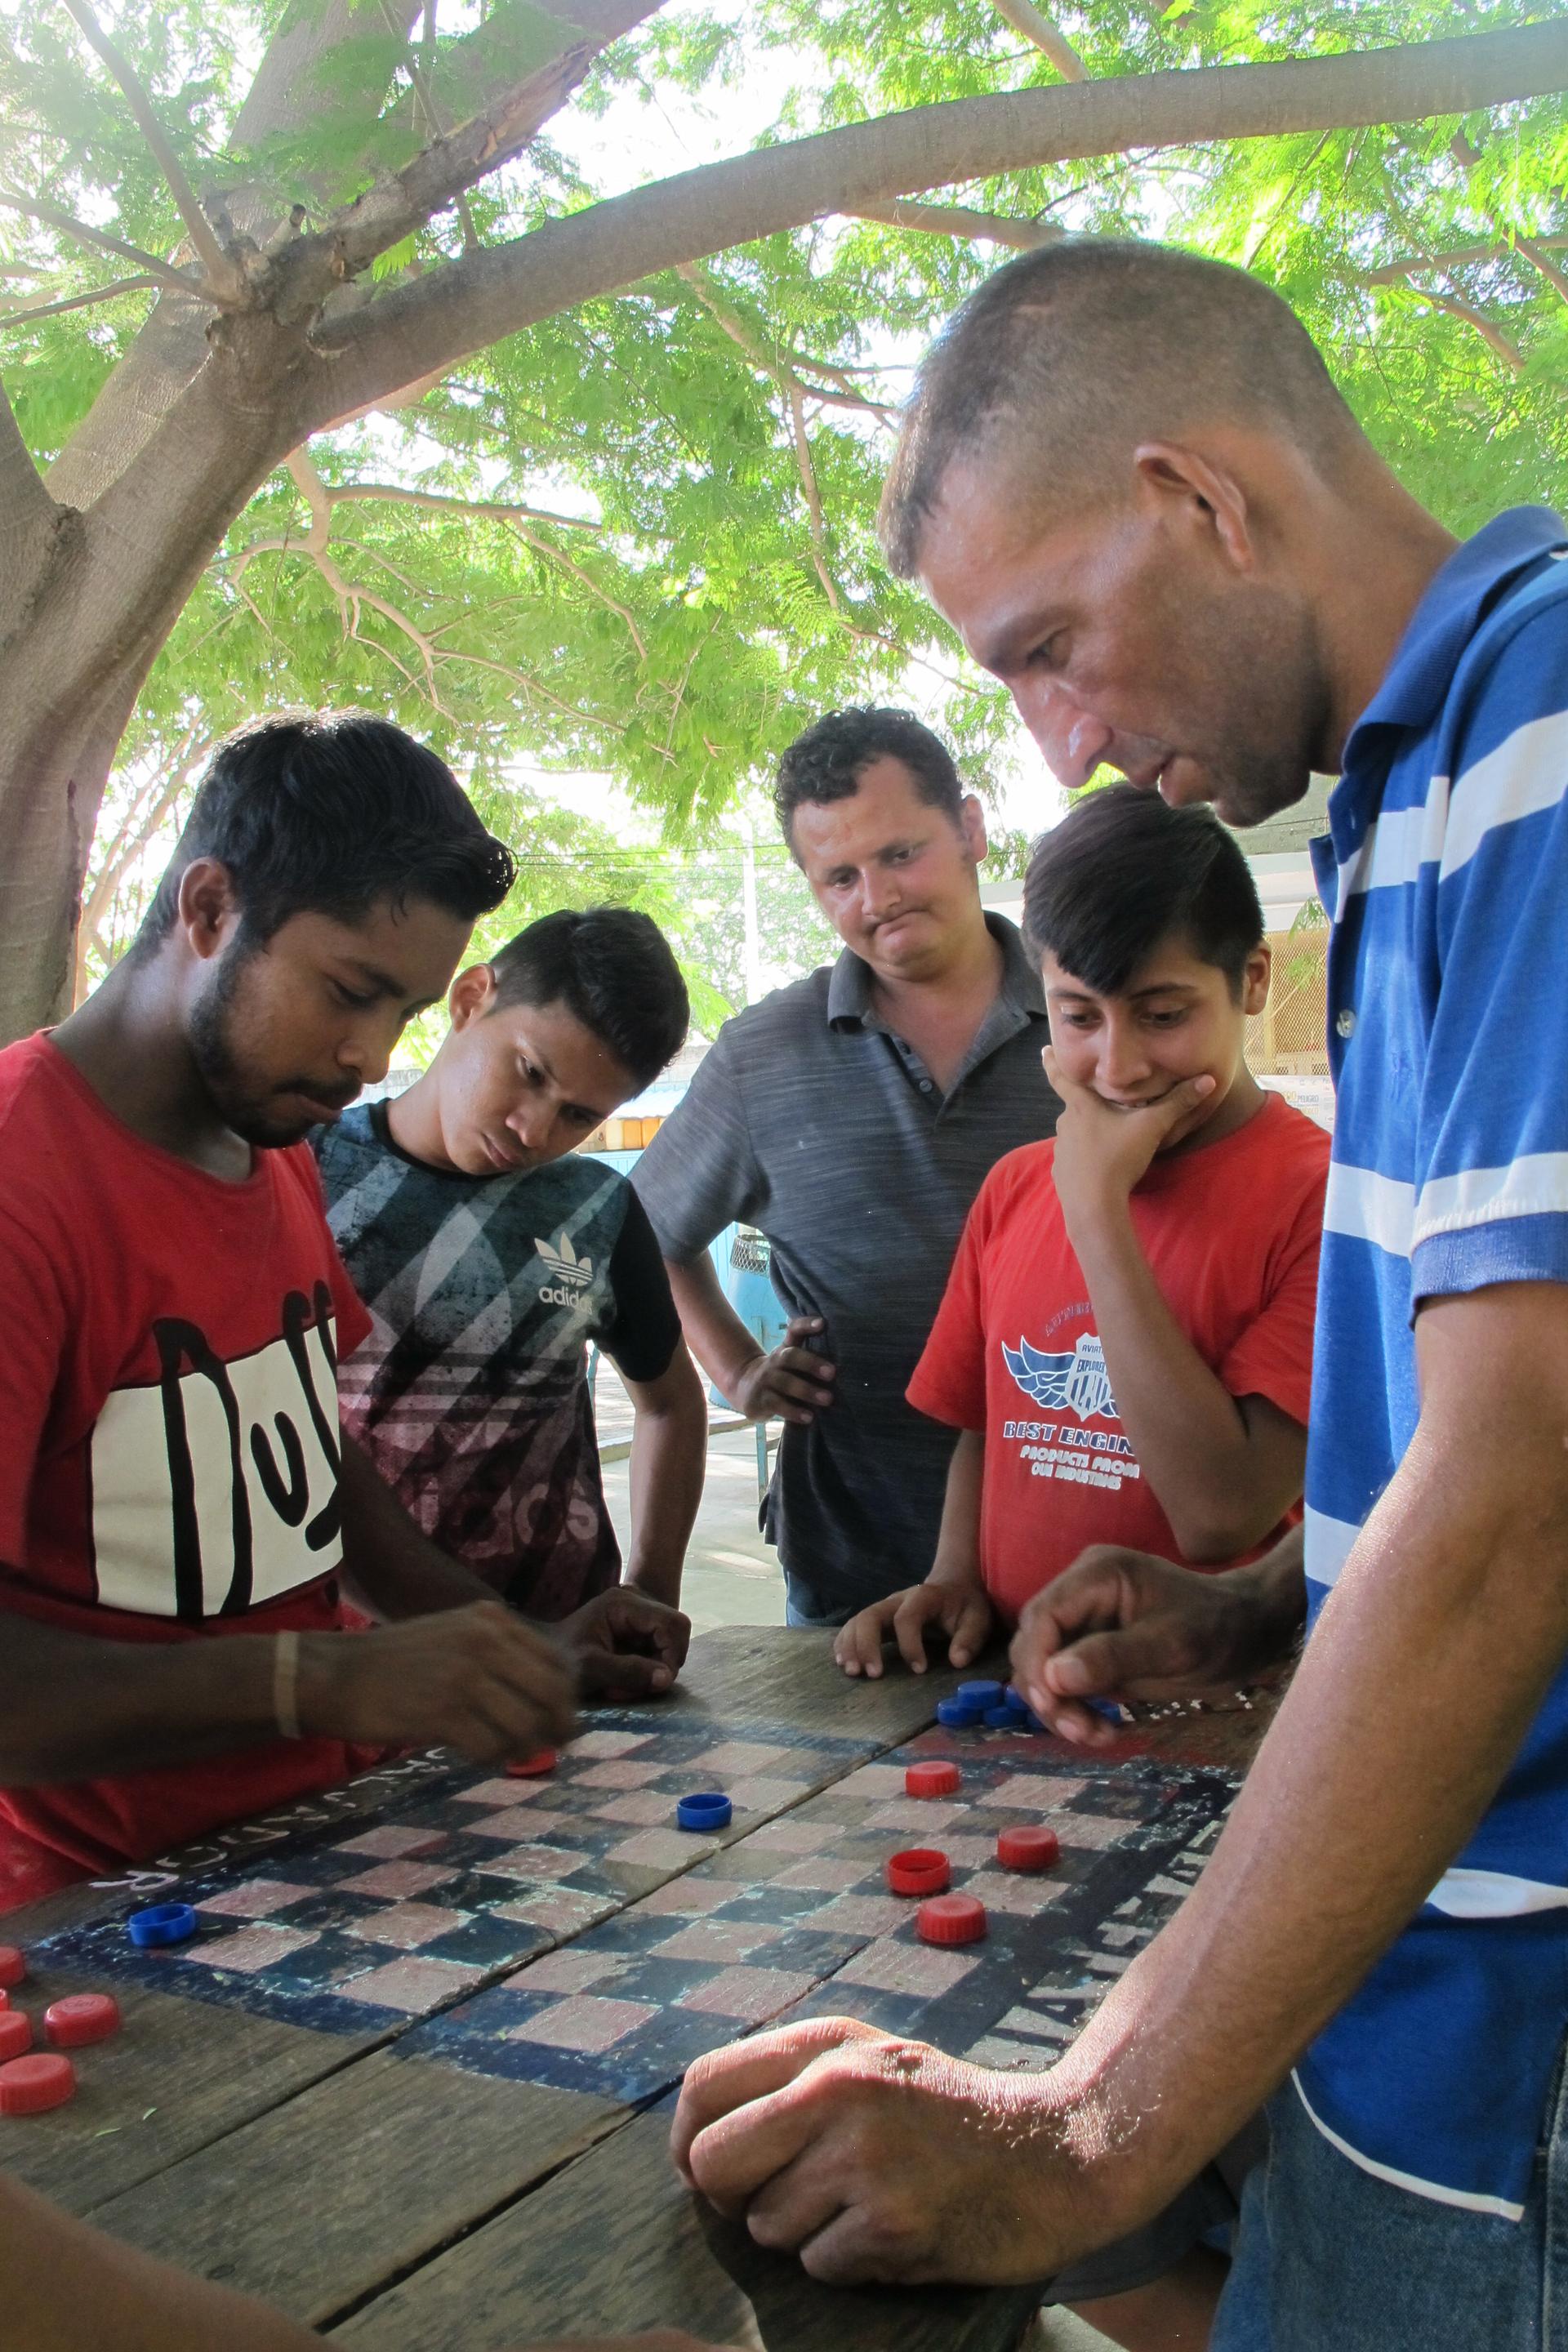 Many Central American migrants pass the days playing competitive games of checkers at the local migrant shelter in Ixtepec, Mexico. The city, as well as the surrounding region, was devastated by last September’s earthquakes.